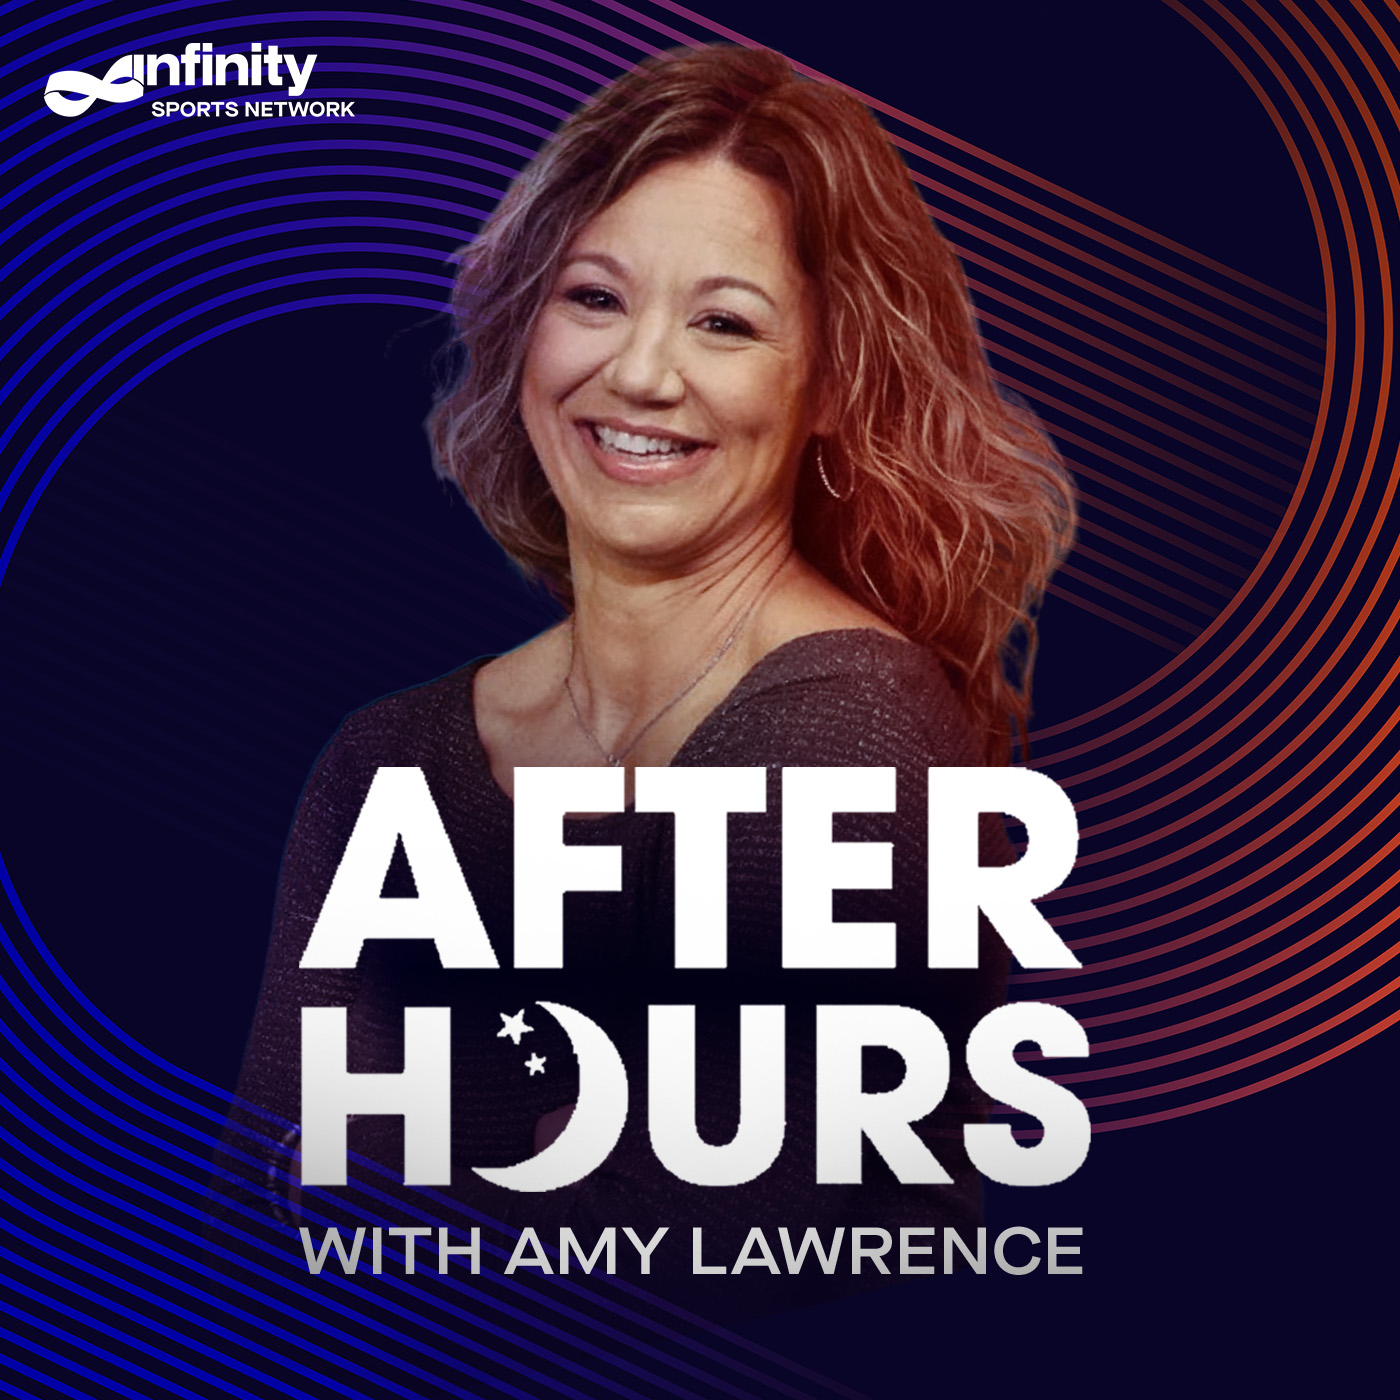 6/3/21 After Hours with Amy Lawrence PODCAST: Hour 4